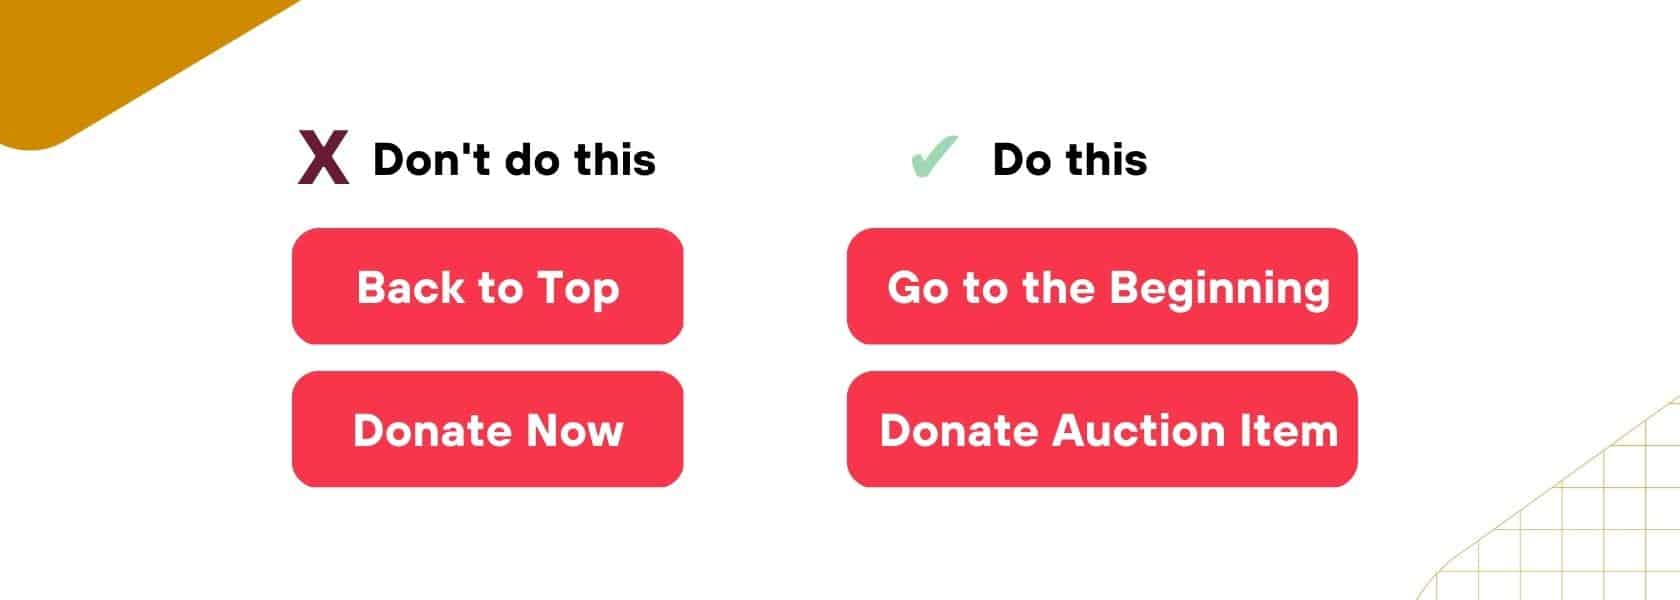 graphic of accessible button text. do not use "back to top". instead use "go to the beginning".